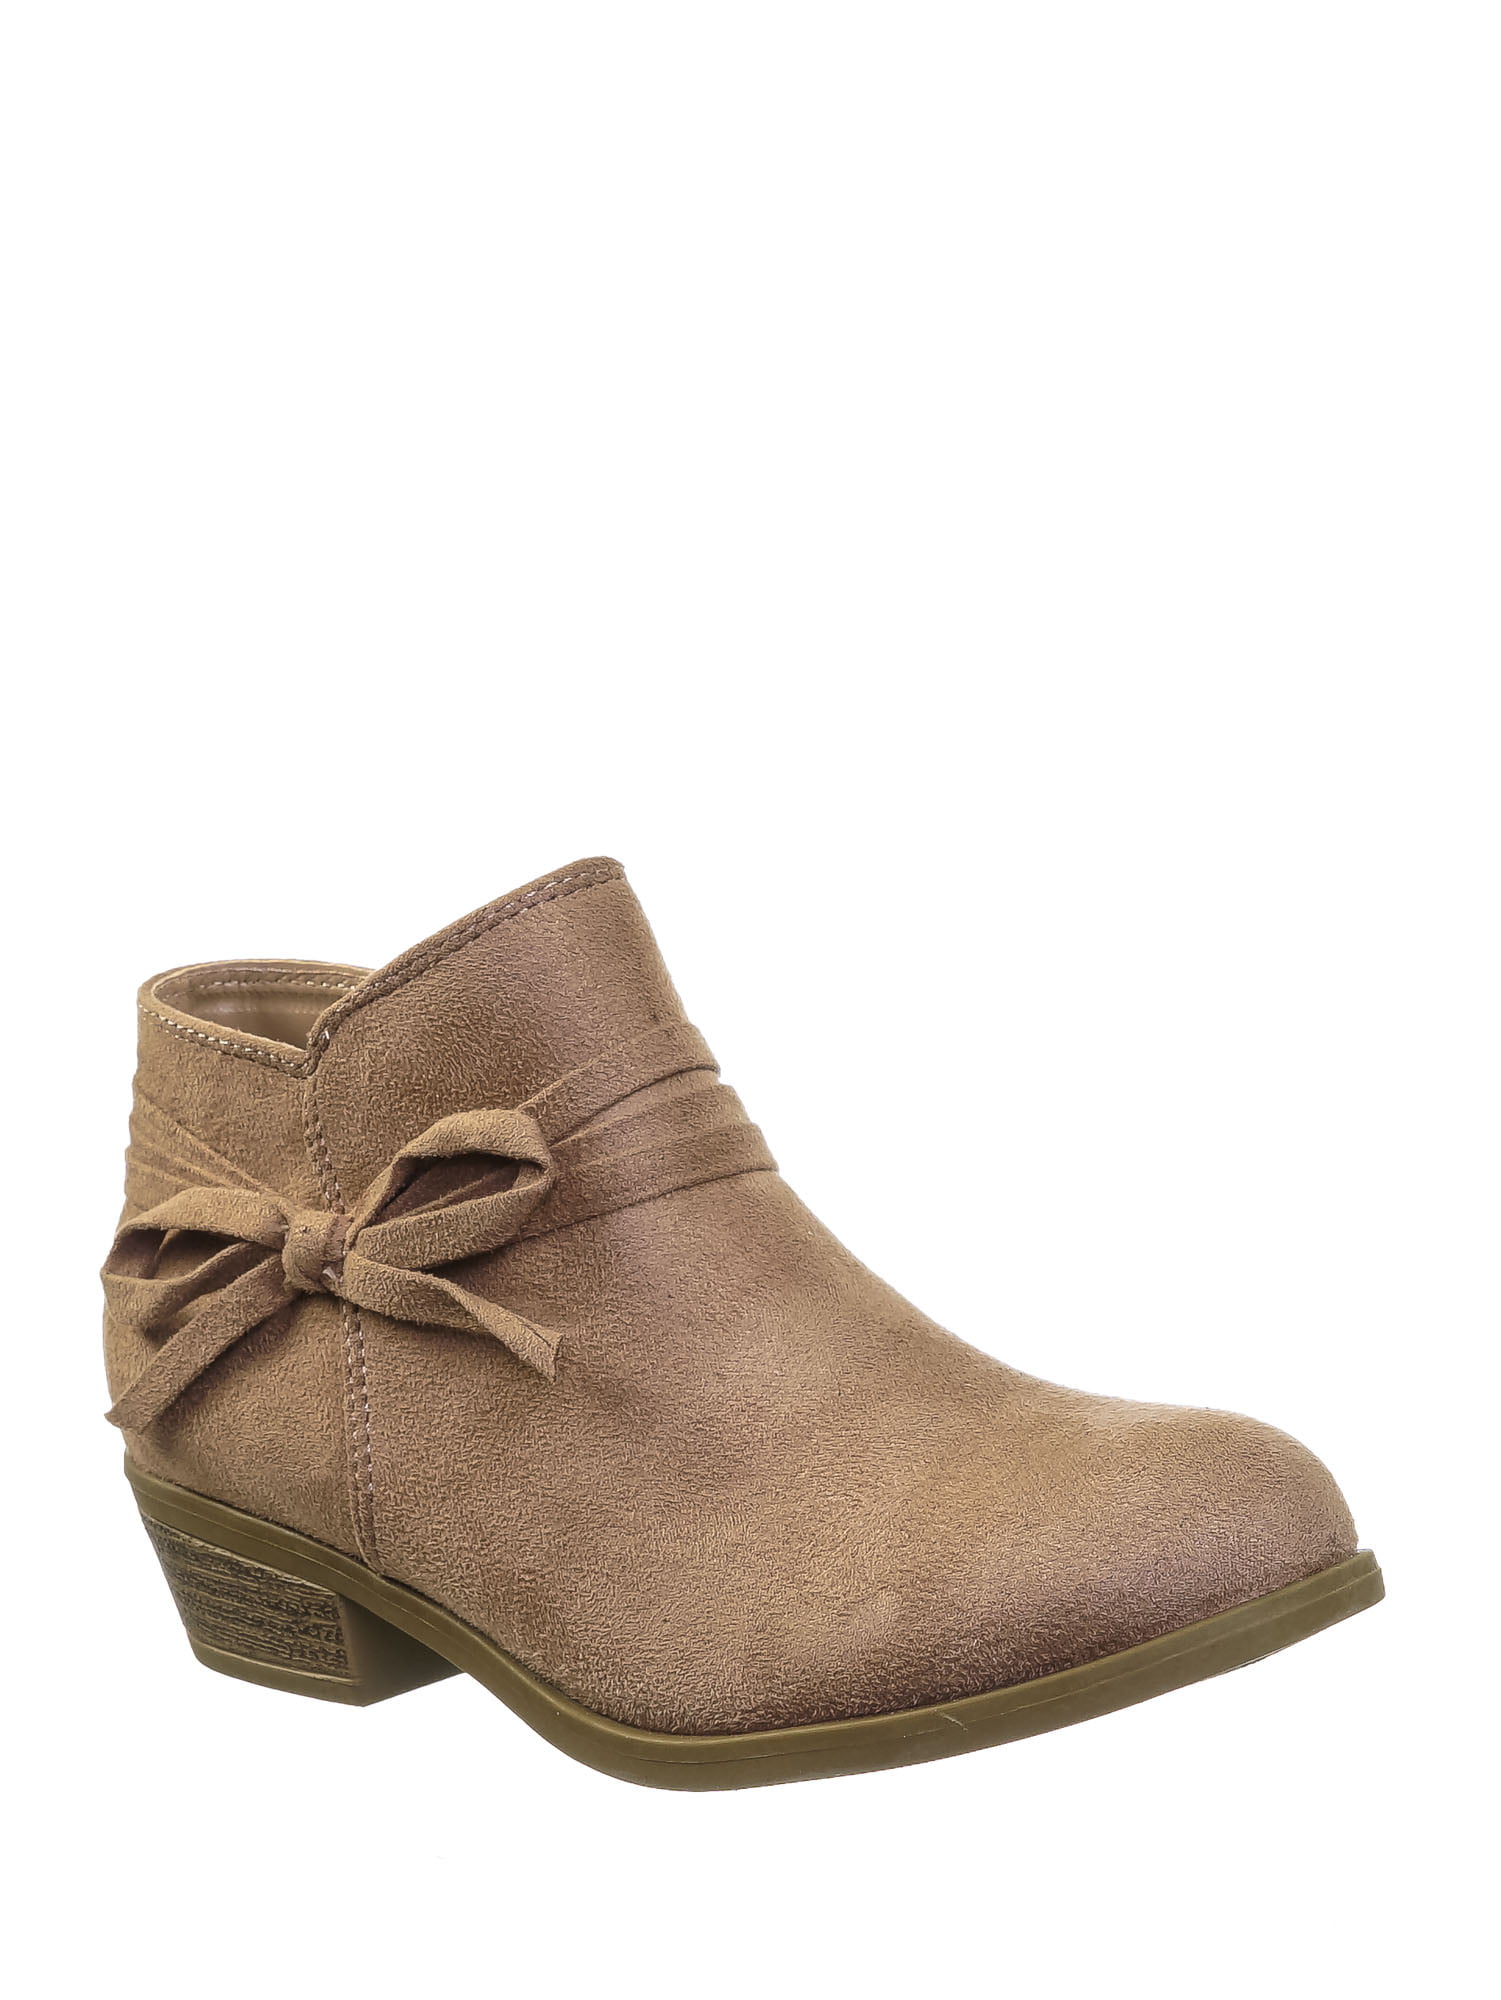 Children Ankle Boots w Bow - Kids 